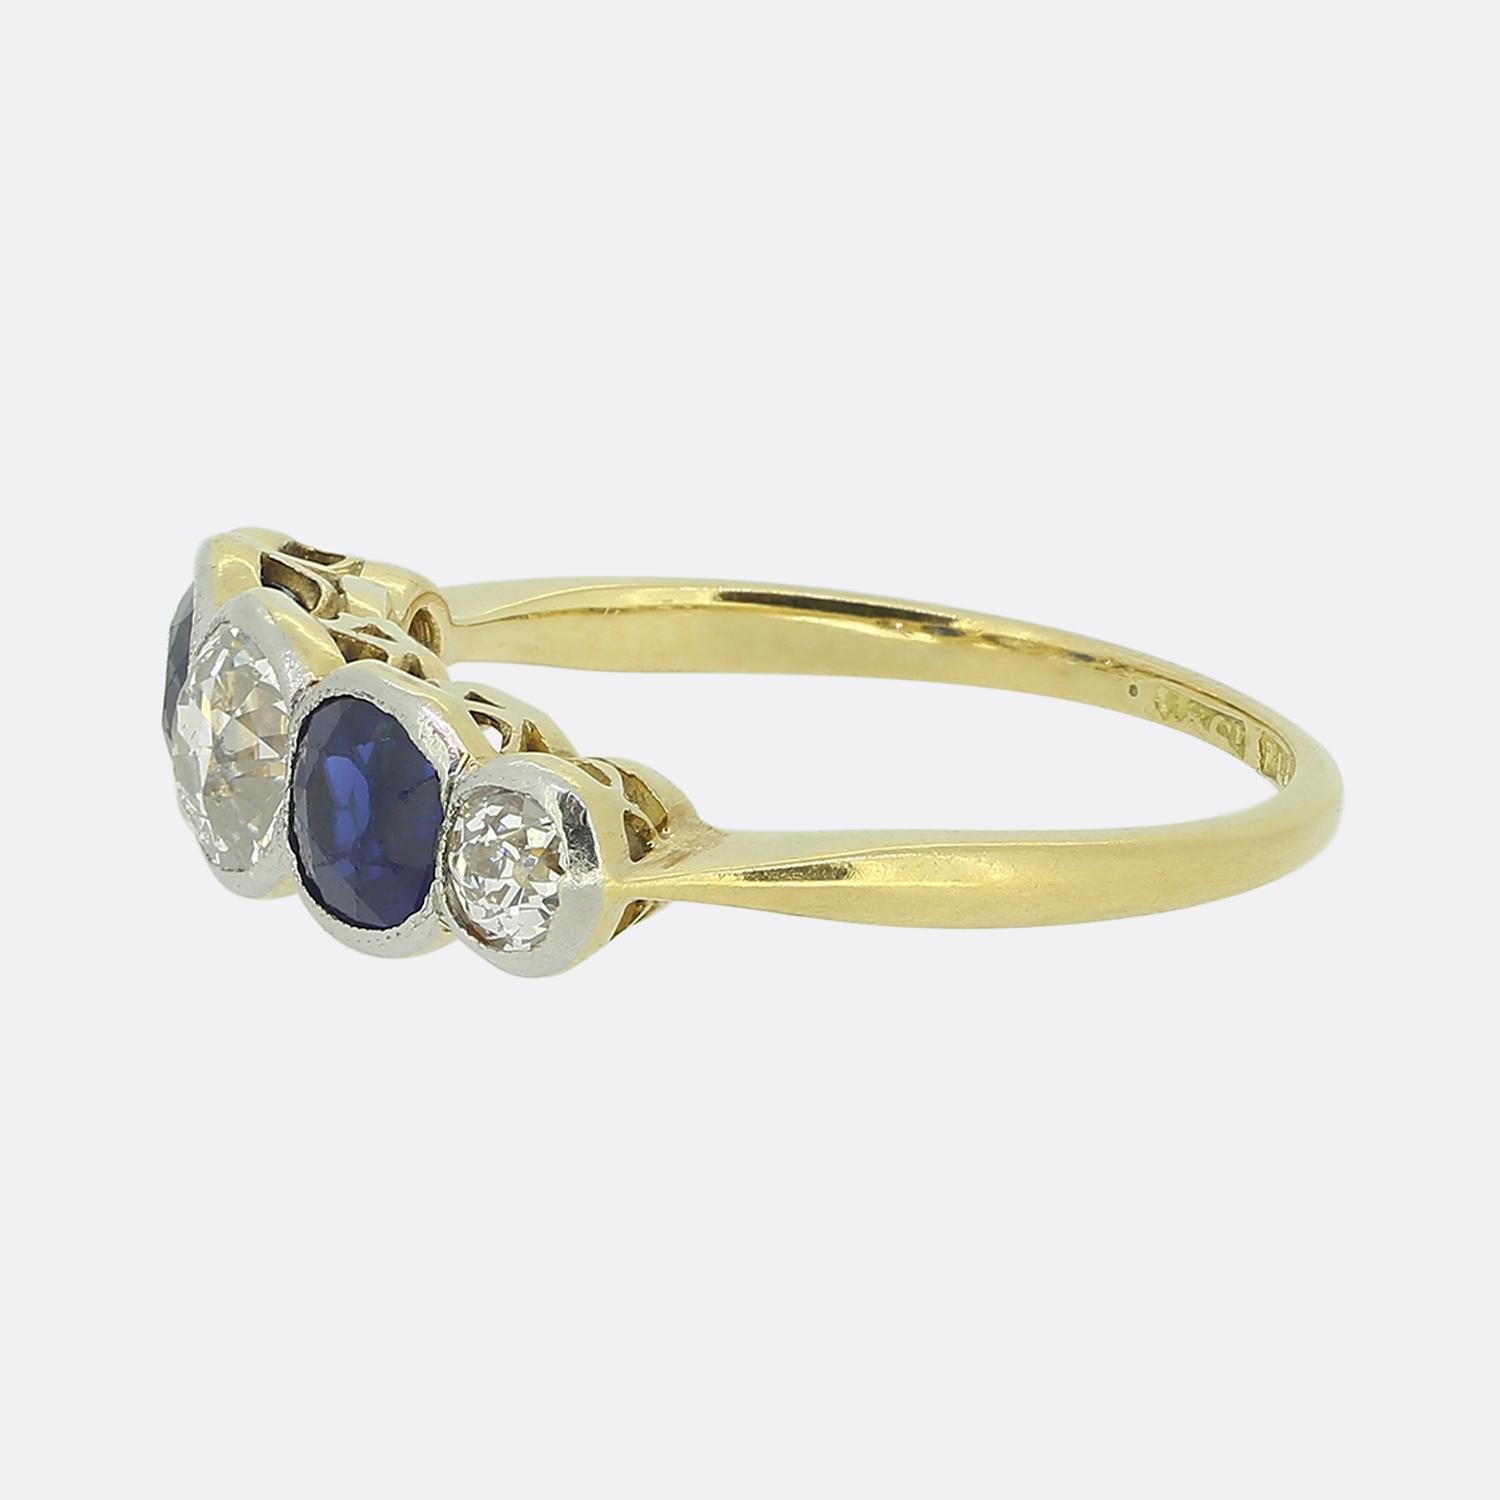 Here we have a lovely sapphire and diamond five stone ring that dates back to the Art Deco era. The stones graduate in size with the largest in the centre being a  0.45 carat old European cut diamond. The diamonds are a bright white colour which is